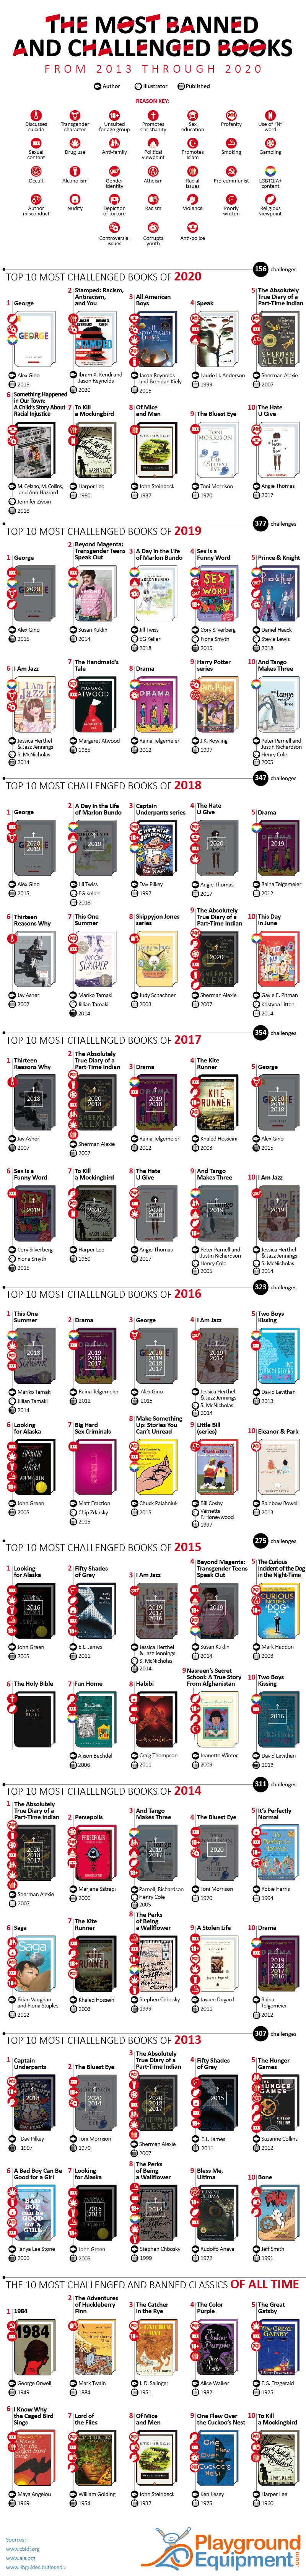 Fifty Shades of Grey' Beaten by 'Captain Underpants' as Most Challenged Book